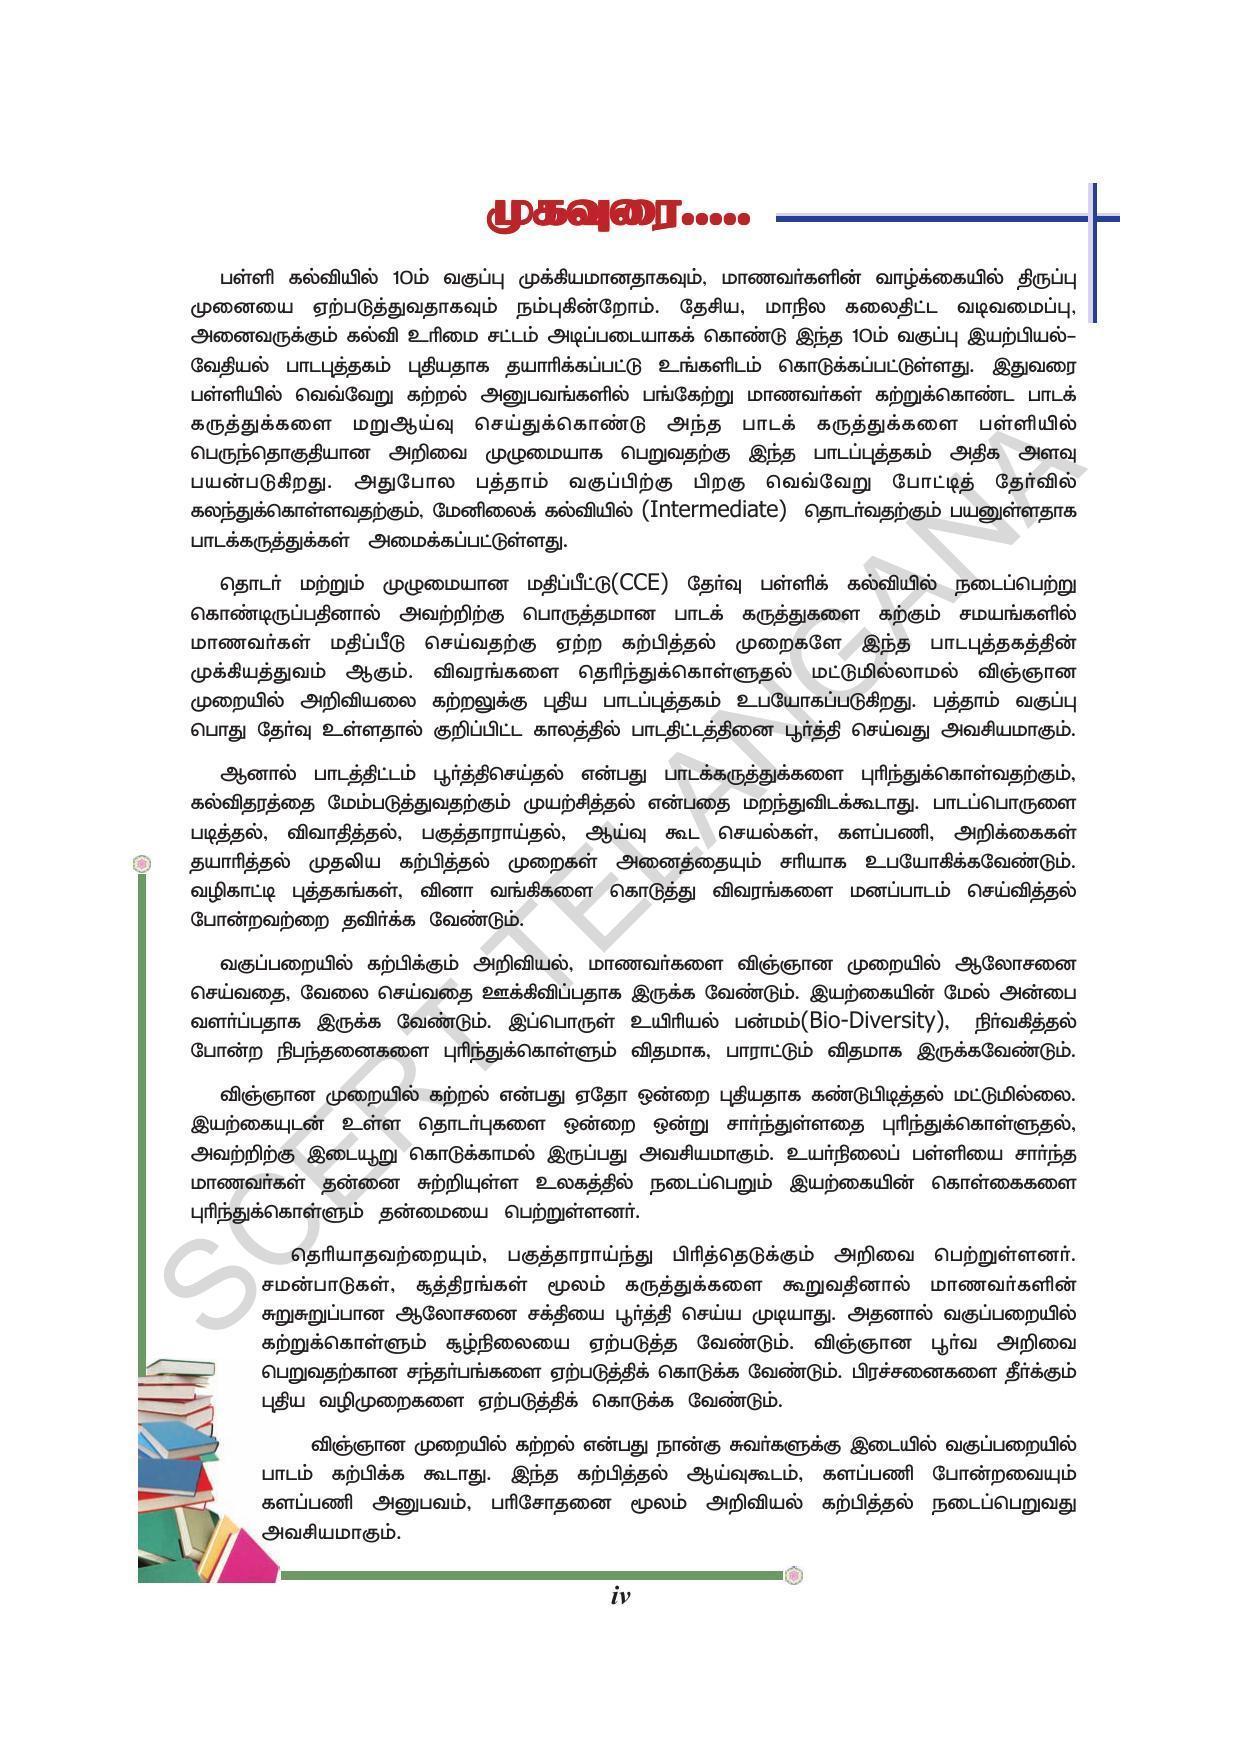 TS SCERT Class 10 Physical Science(Tamil Medium) Text Book - Page 6